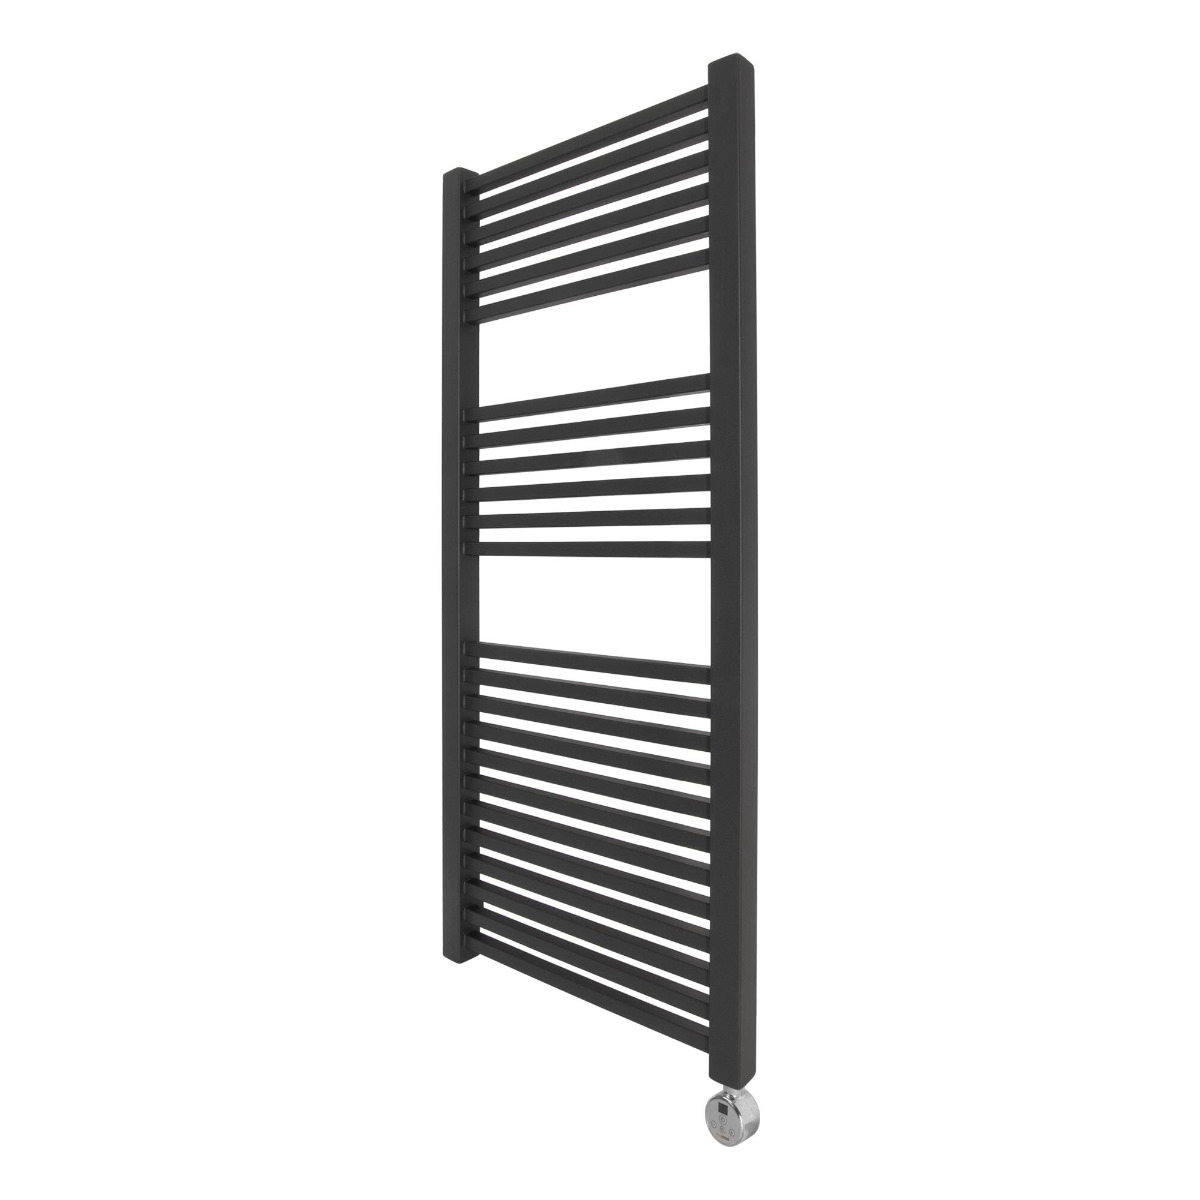 Ecostrad Cube Thermostatic Electric Towel Rail - Anthracite 600w (500 x 1200mm)